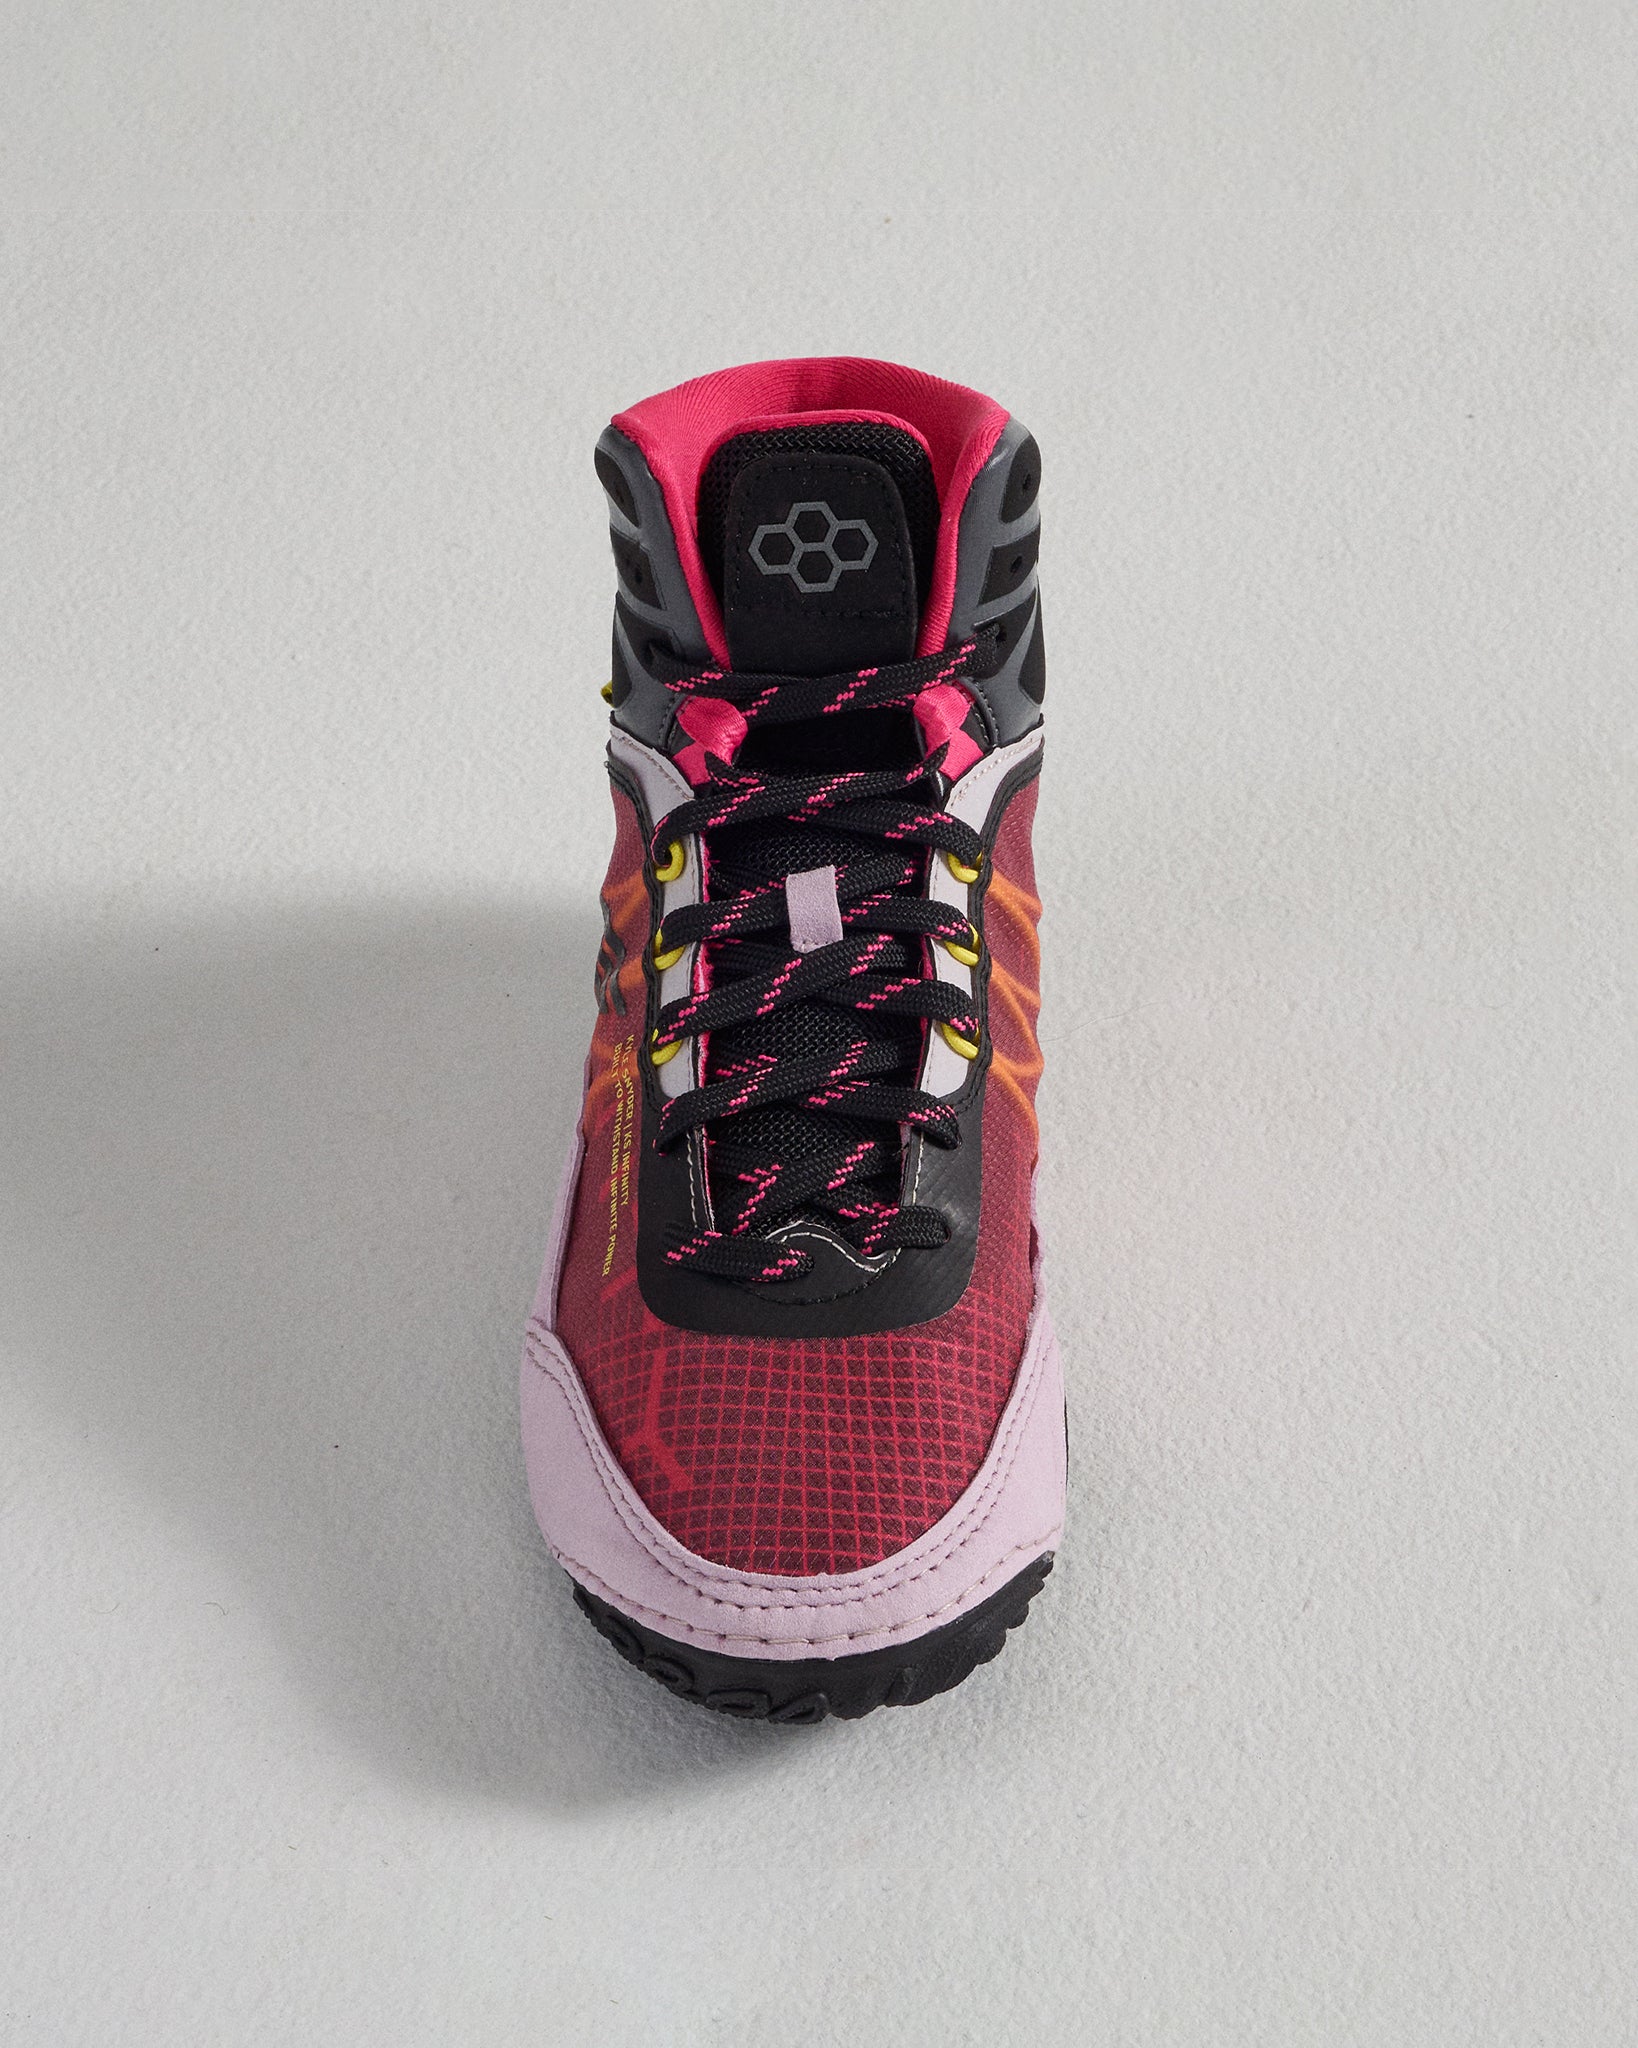 RUDIS Journey Adult Training Shoes - Pink Glow Pink Glow / 9.5M/11W